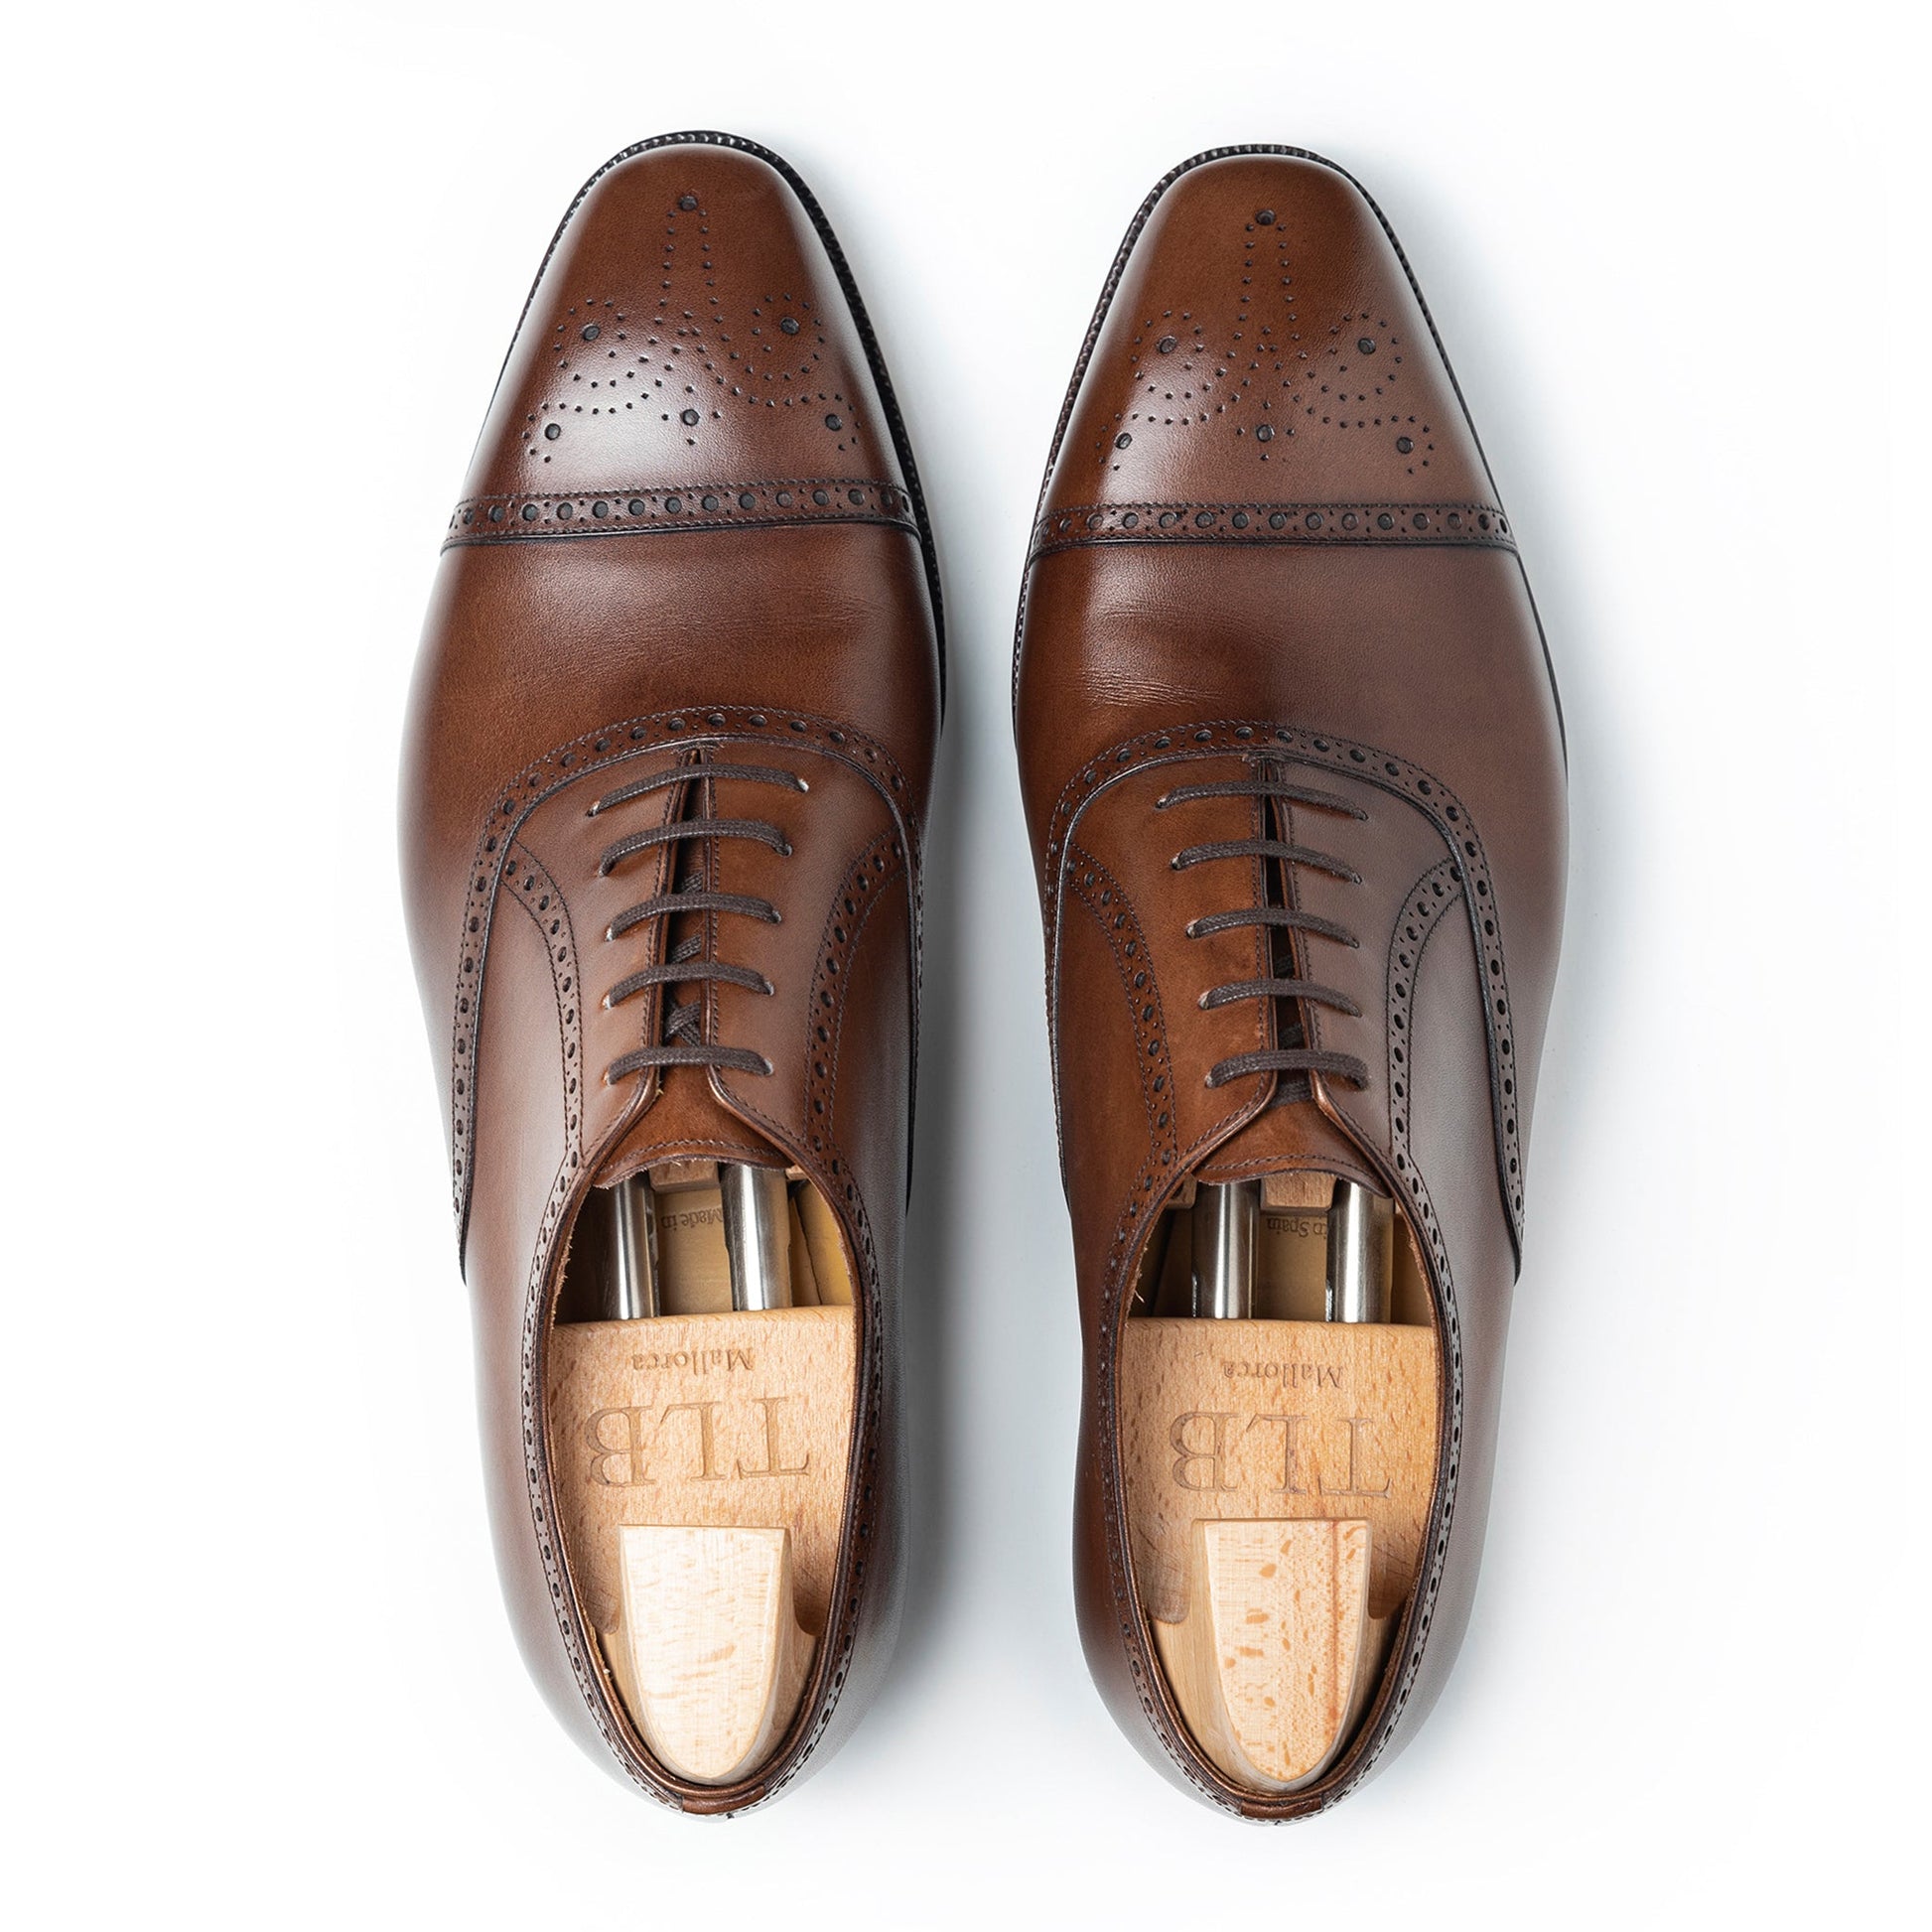 TLB Mallorca leather shoes - Men's oxford shoes 